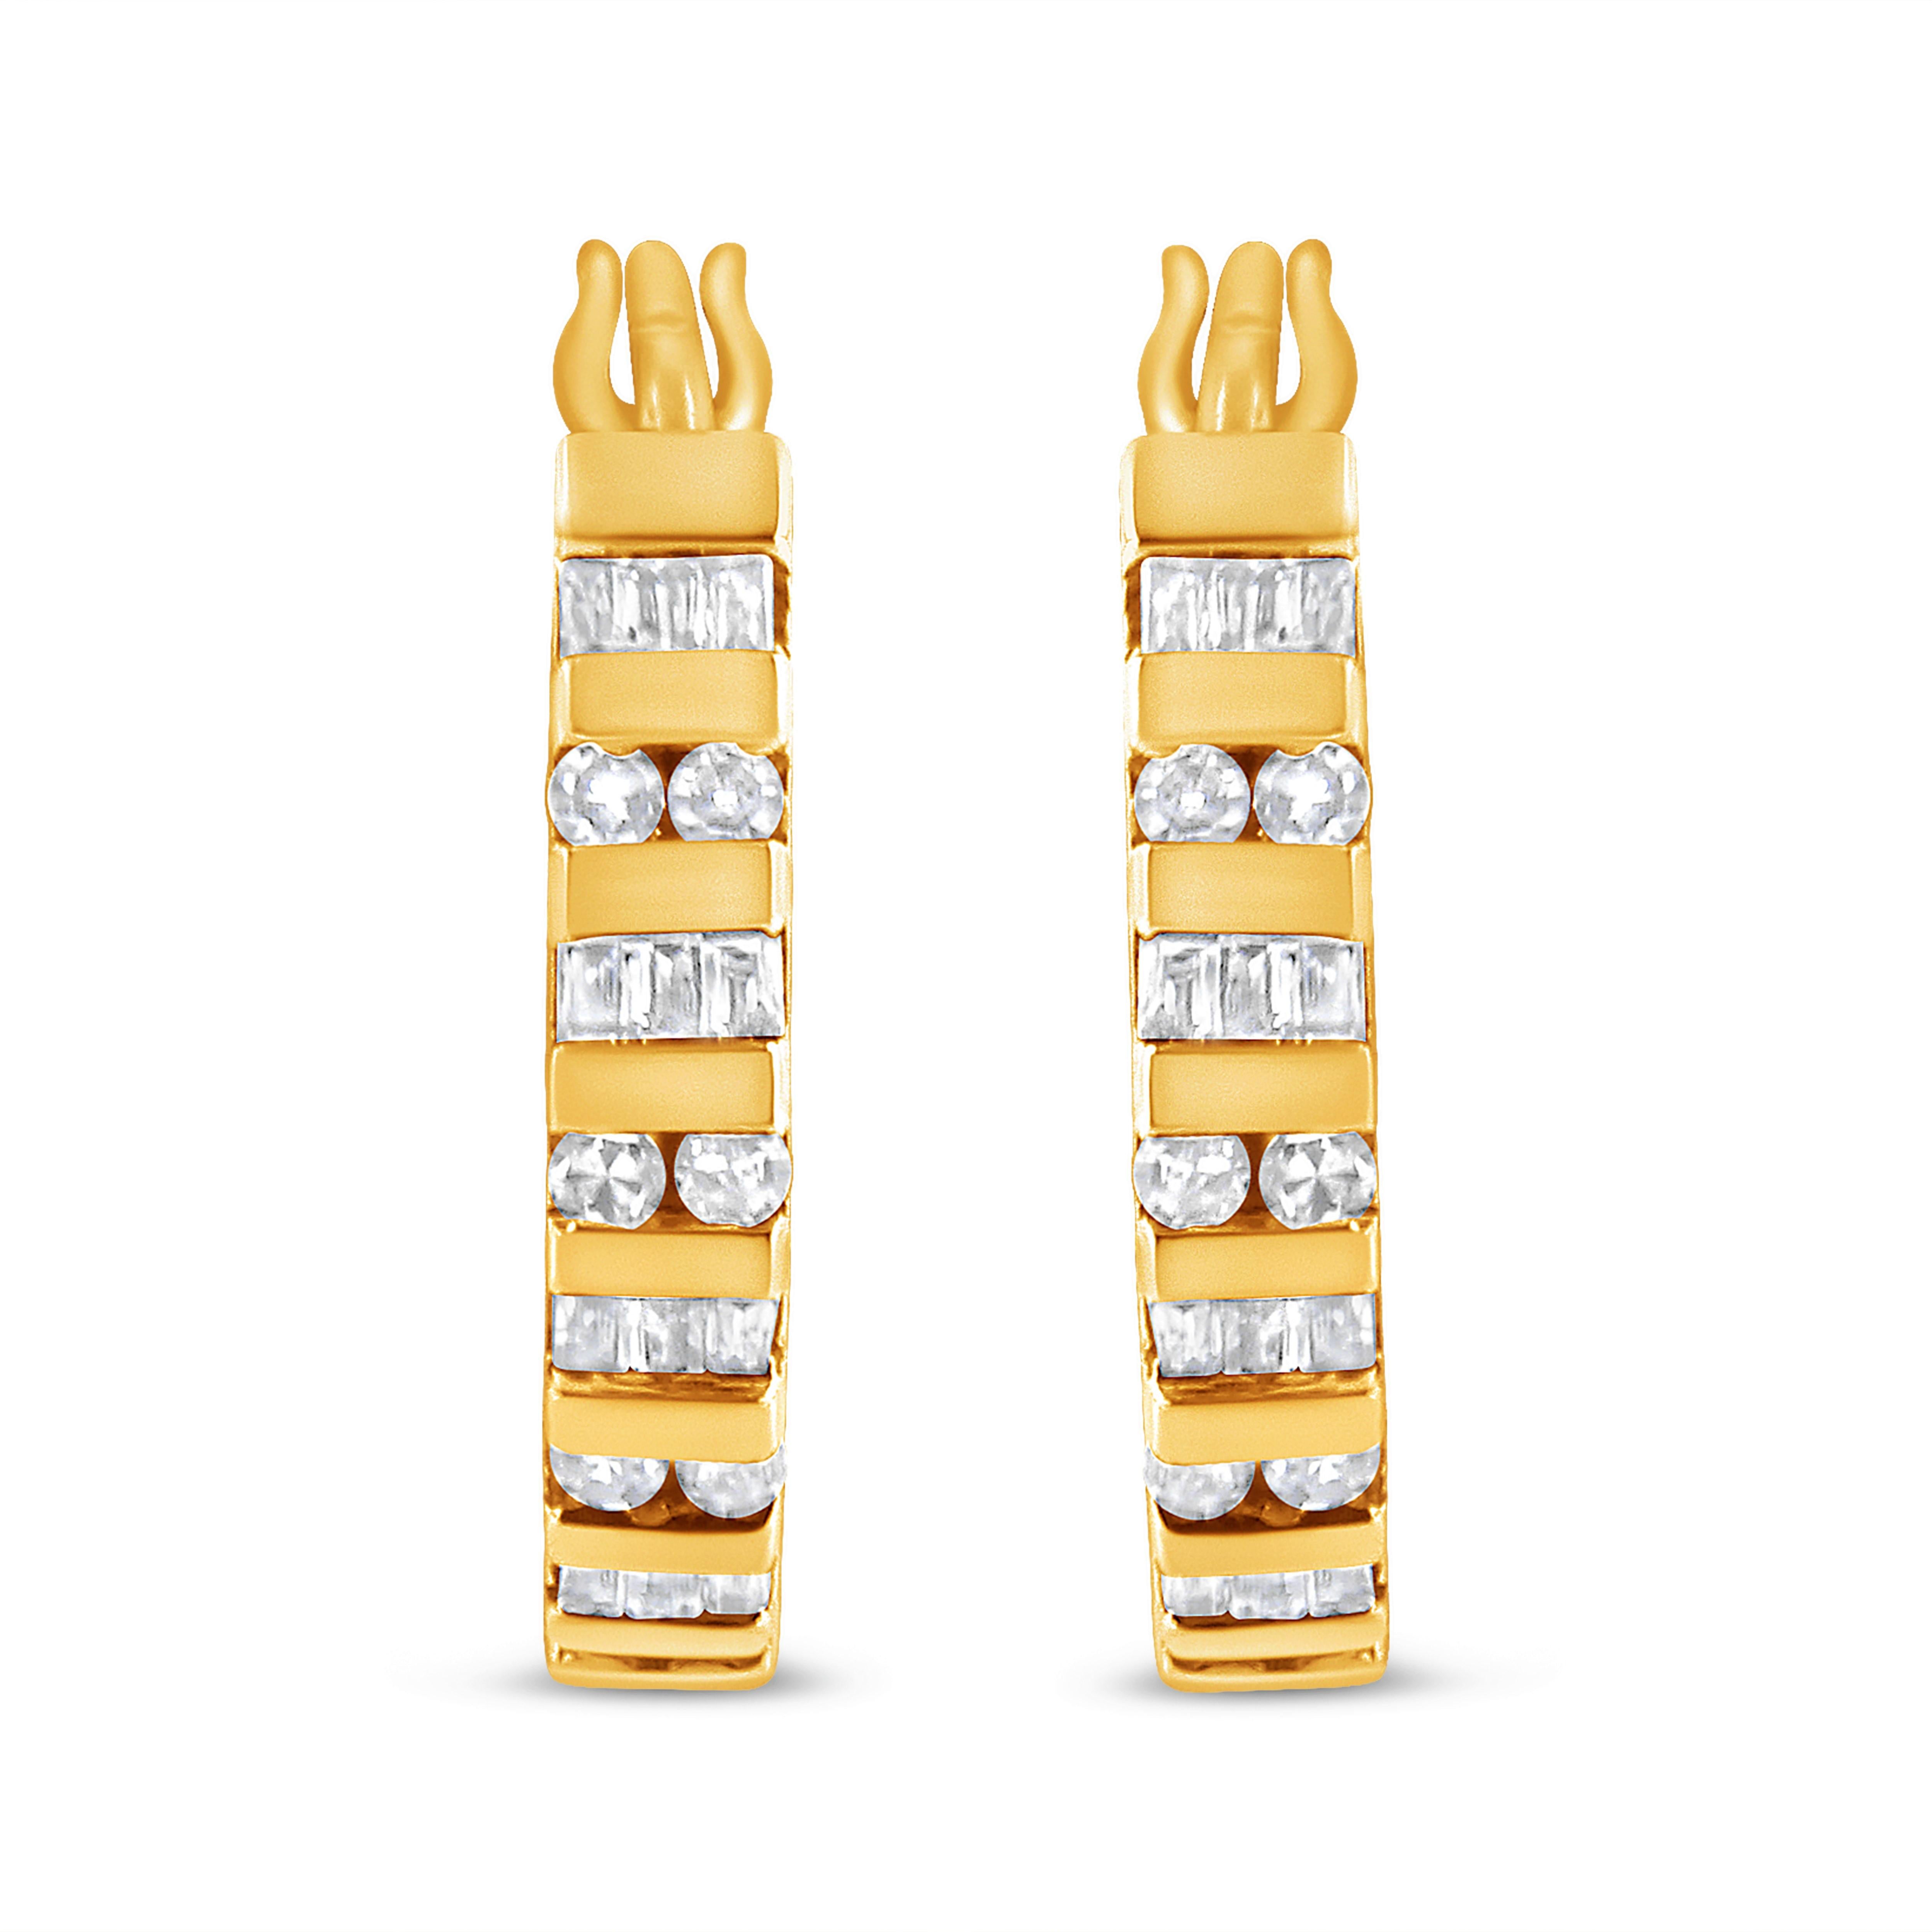 Accentuated by stunning baguette diamonds, these hoop earrings are ready to bring a touch of elegance to your look. Made of 10k yellow gold, these earrings come with a clip on mechanism to allow you a secure fit. They're embellished with 1/2 c.t. of